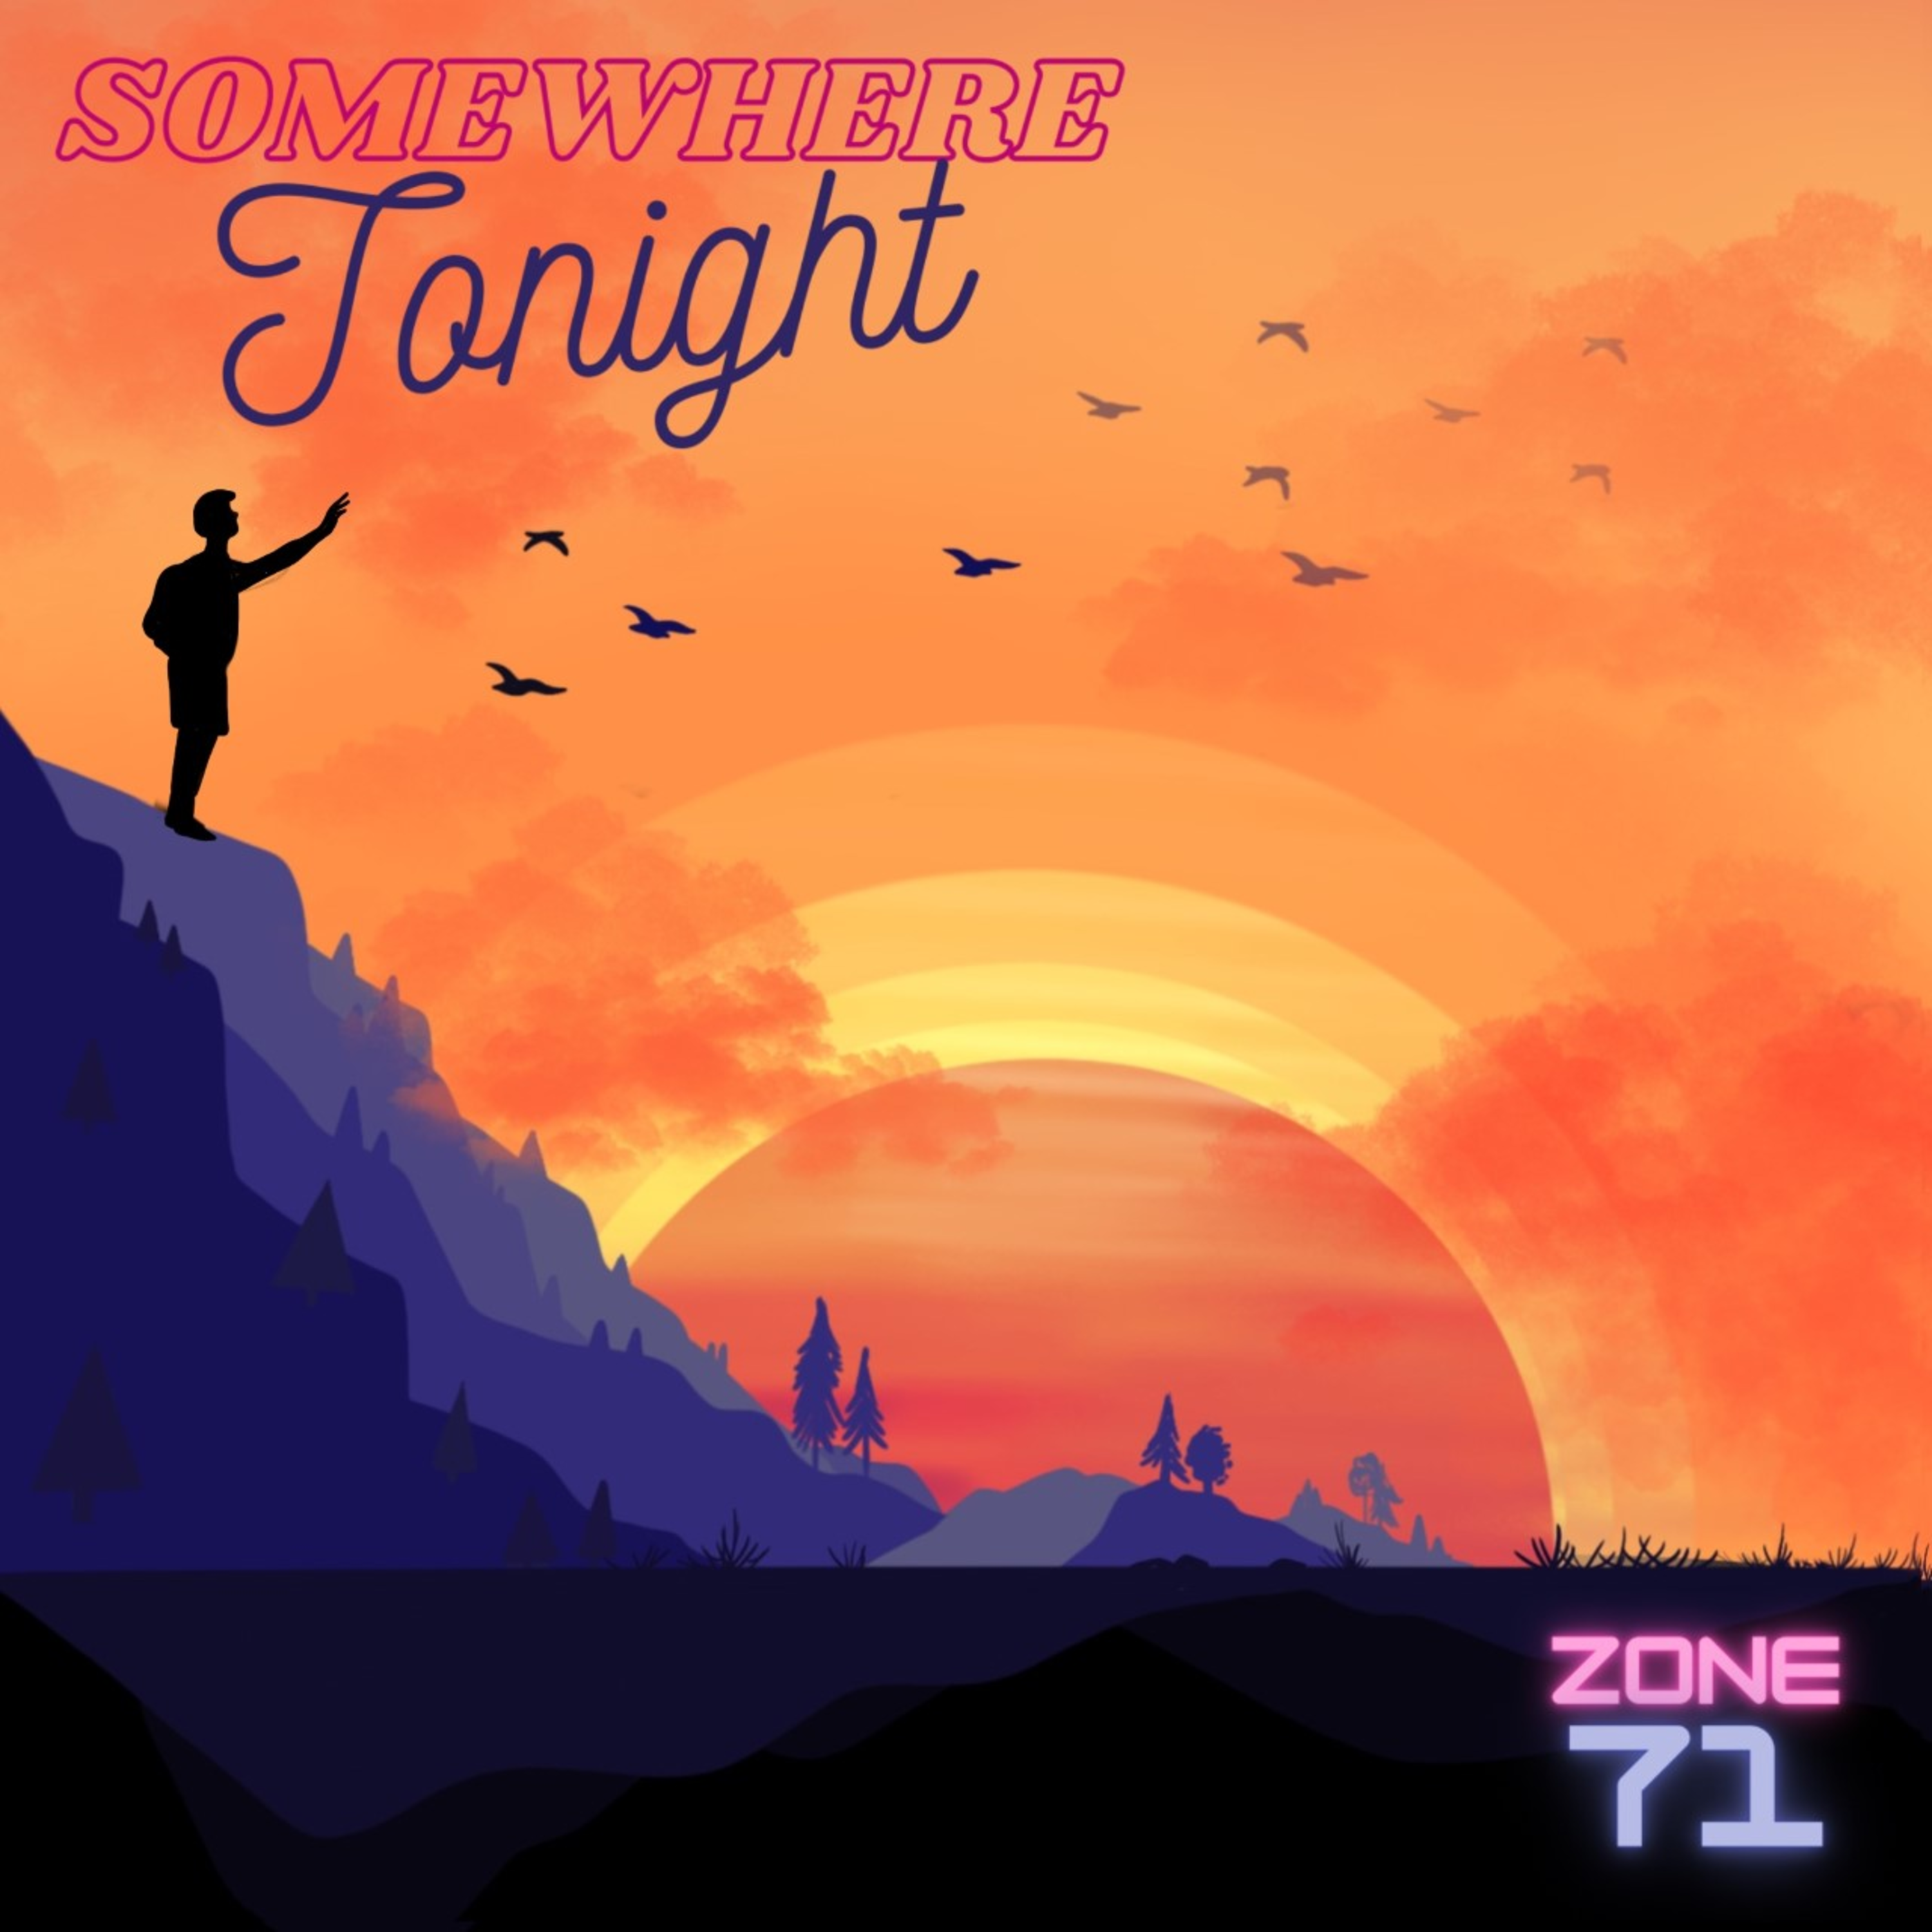 ZONE 71 Travels To Cloud Nine In “Somewhere Tonight”